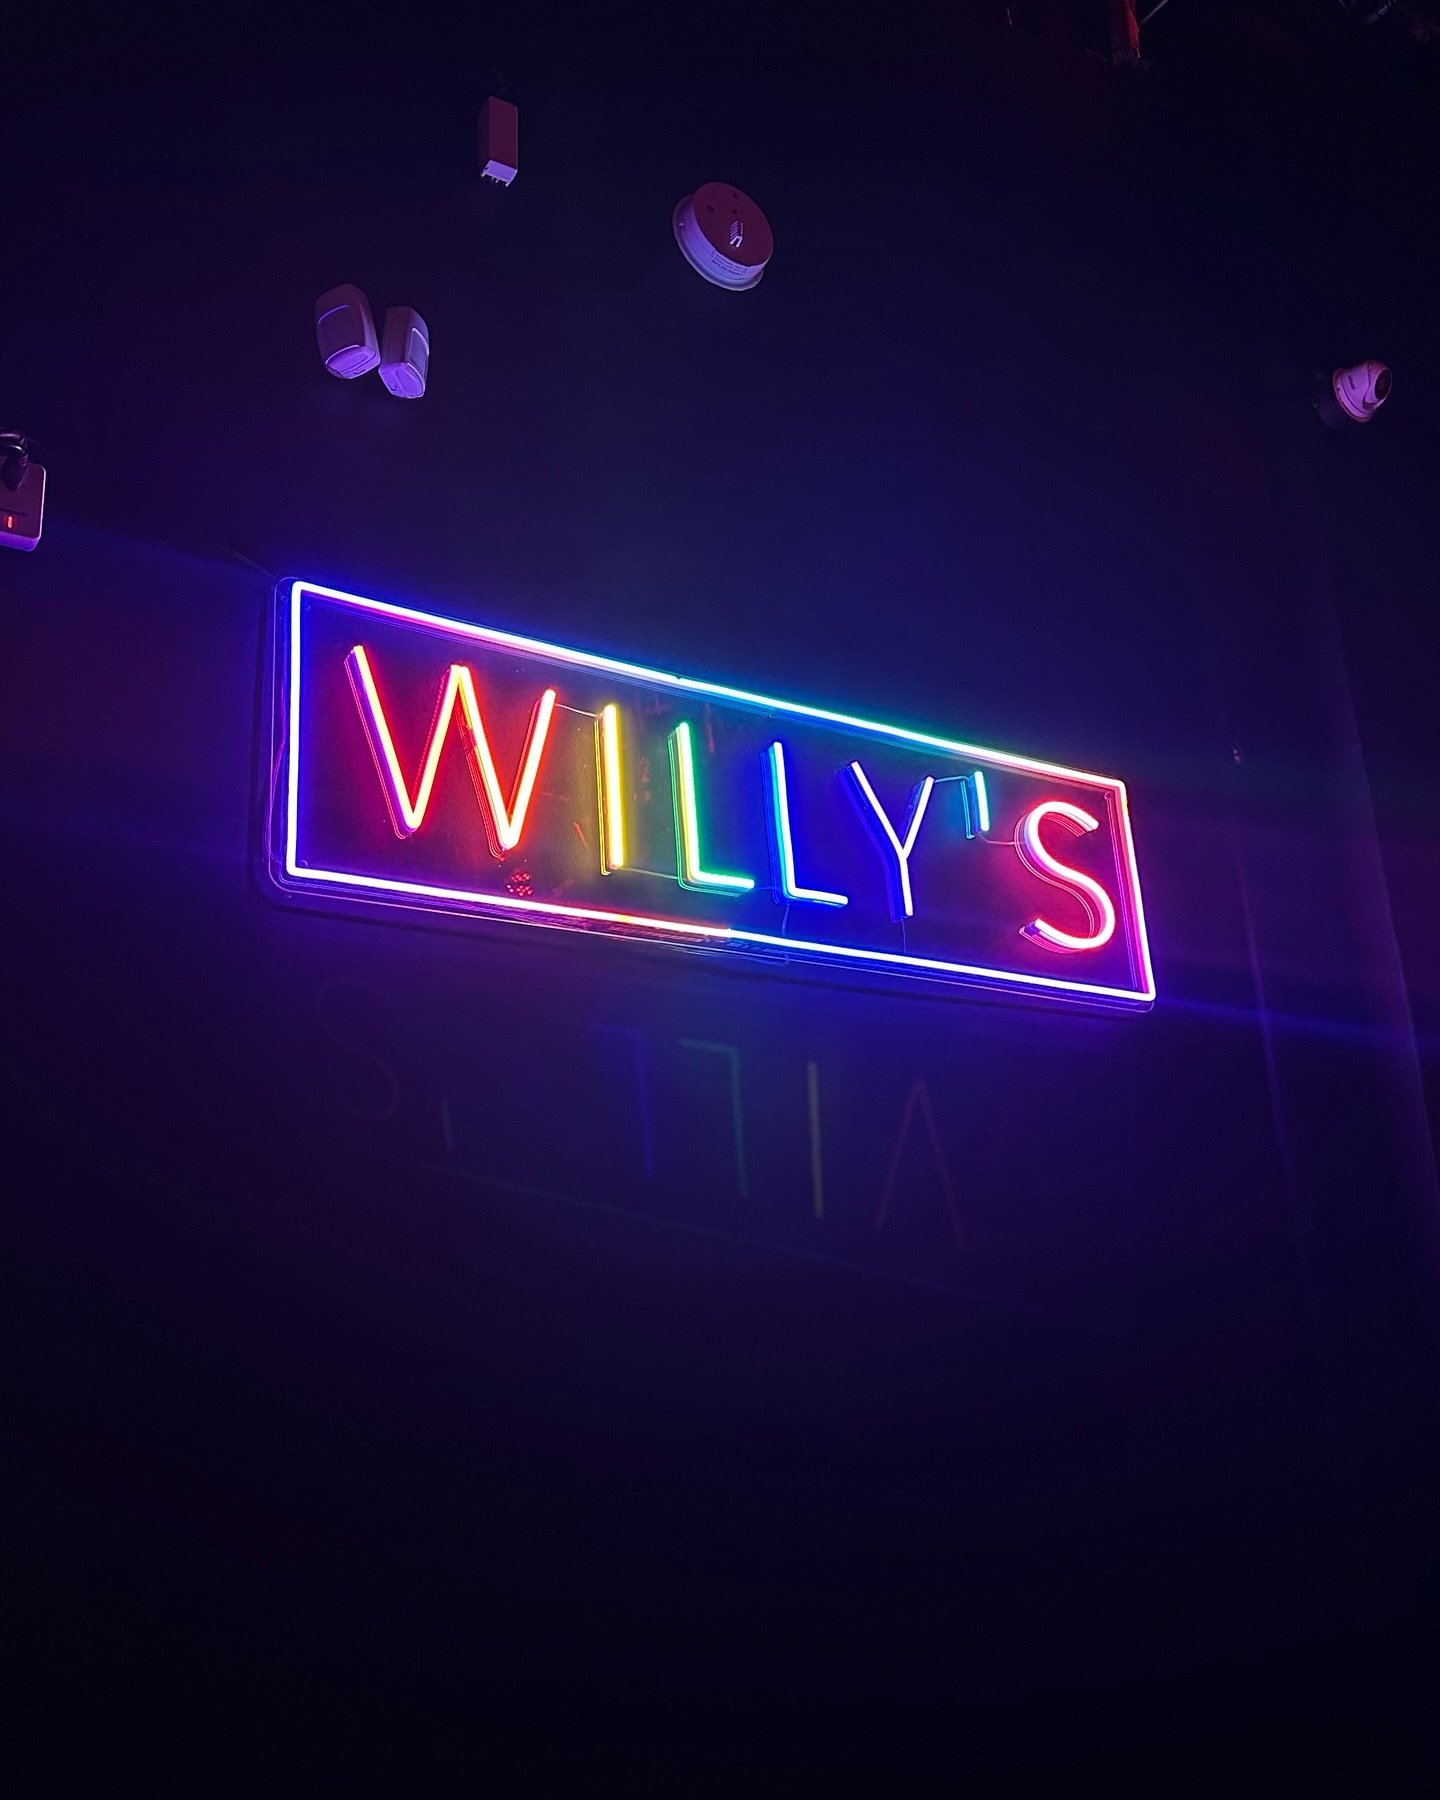 TONIGHT. WILLY&rsquo;S GRAND OPENING 🪩

📀@themisstoto 
💄@fkatwink 

5PM - 7PM HAPPY HOUR. 

ARRIVE EARLY 🔈

NO COVER. 21+ OPEN TO 3AM.
365 NW 24TH ST. WYNWOOD.
HAPPY HOUR 5-7PM